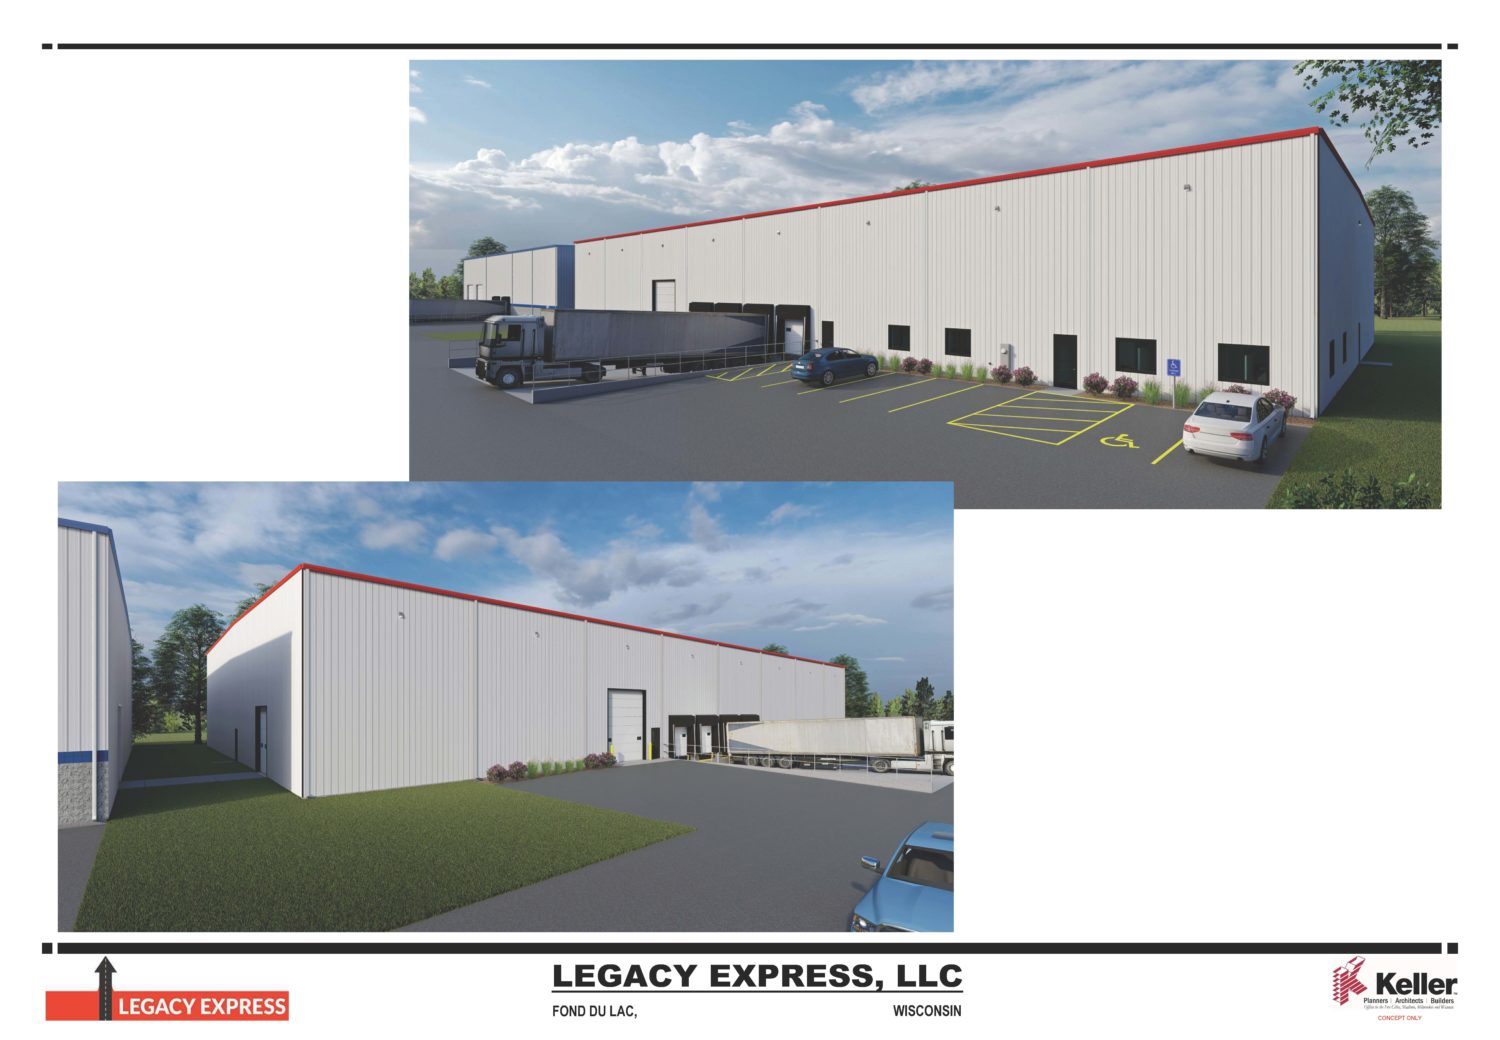 Legacy Exprss - Keller, Inc. to Build for Legacy Express, LLC